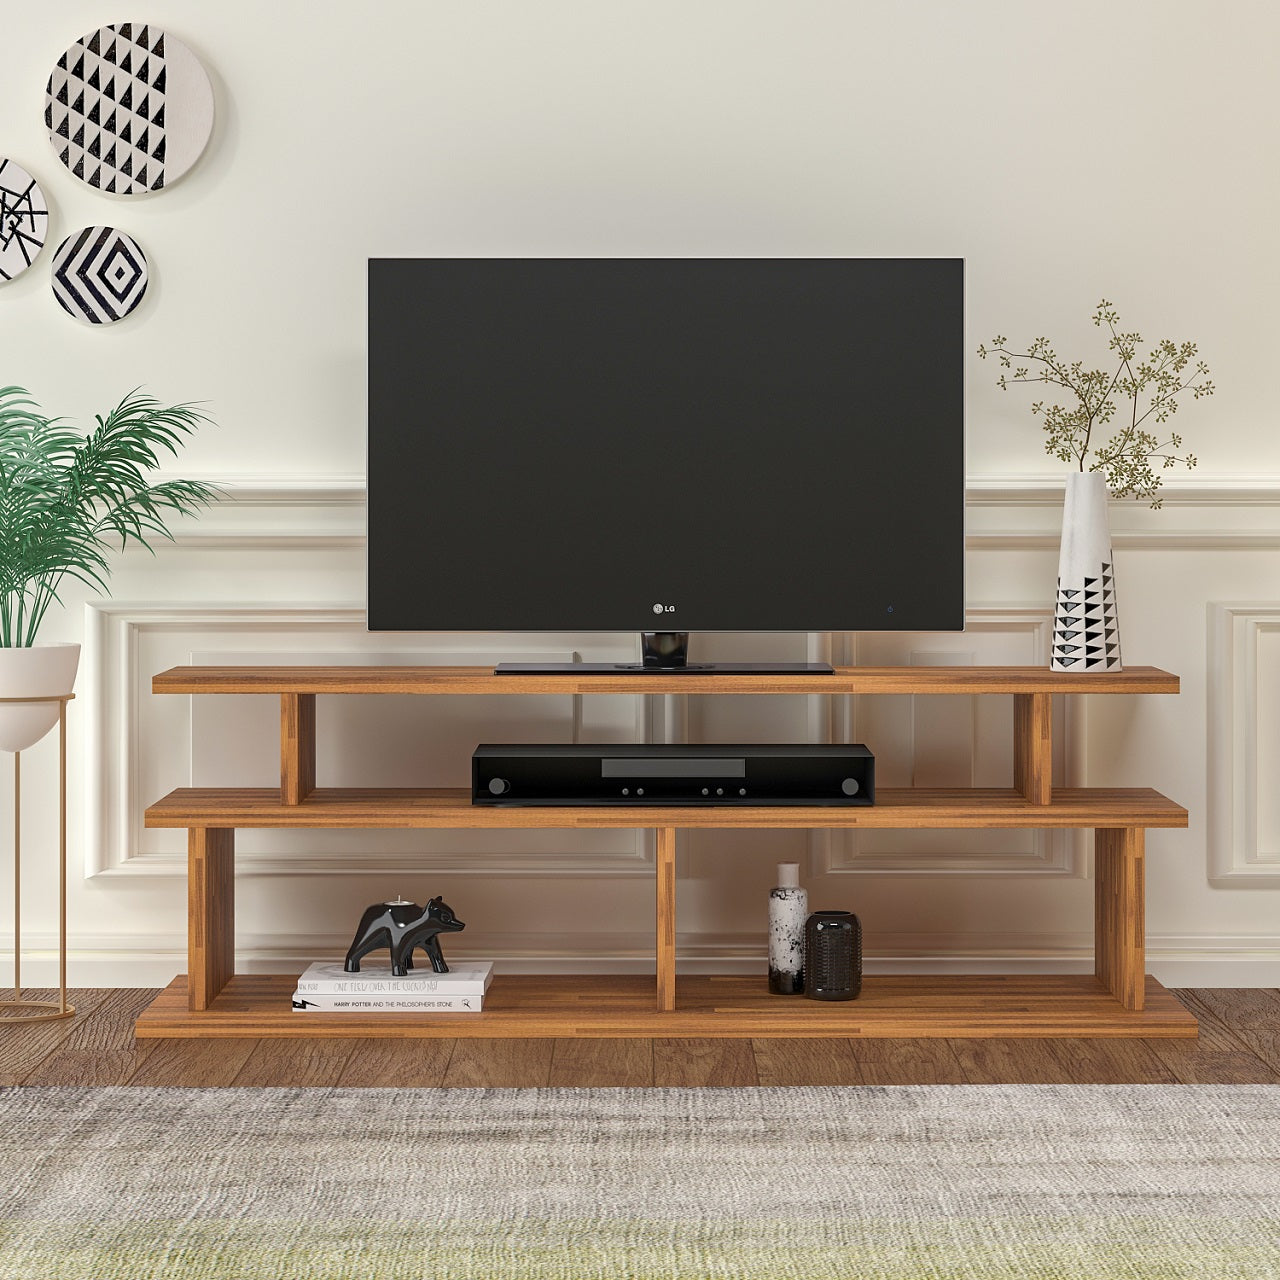 Solid Pine Wood Handmade TV Stand and Media Console for TVs up to 50" Vincent